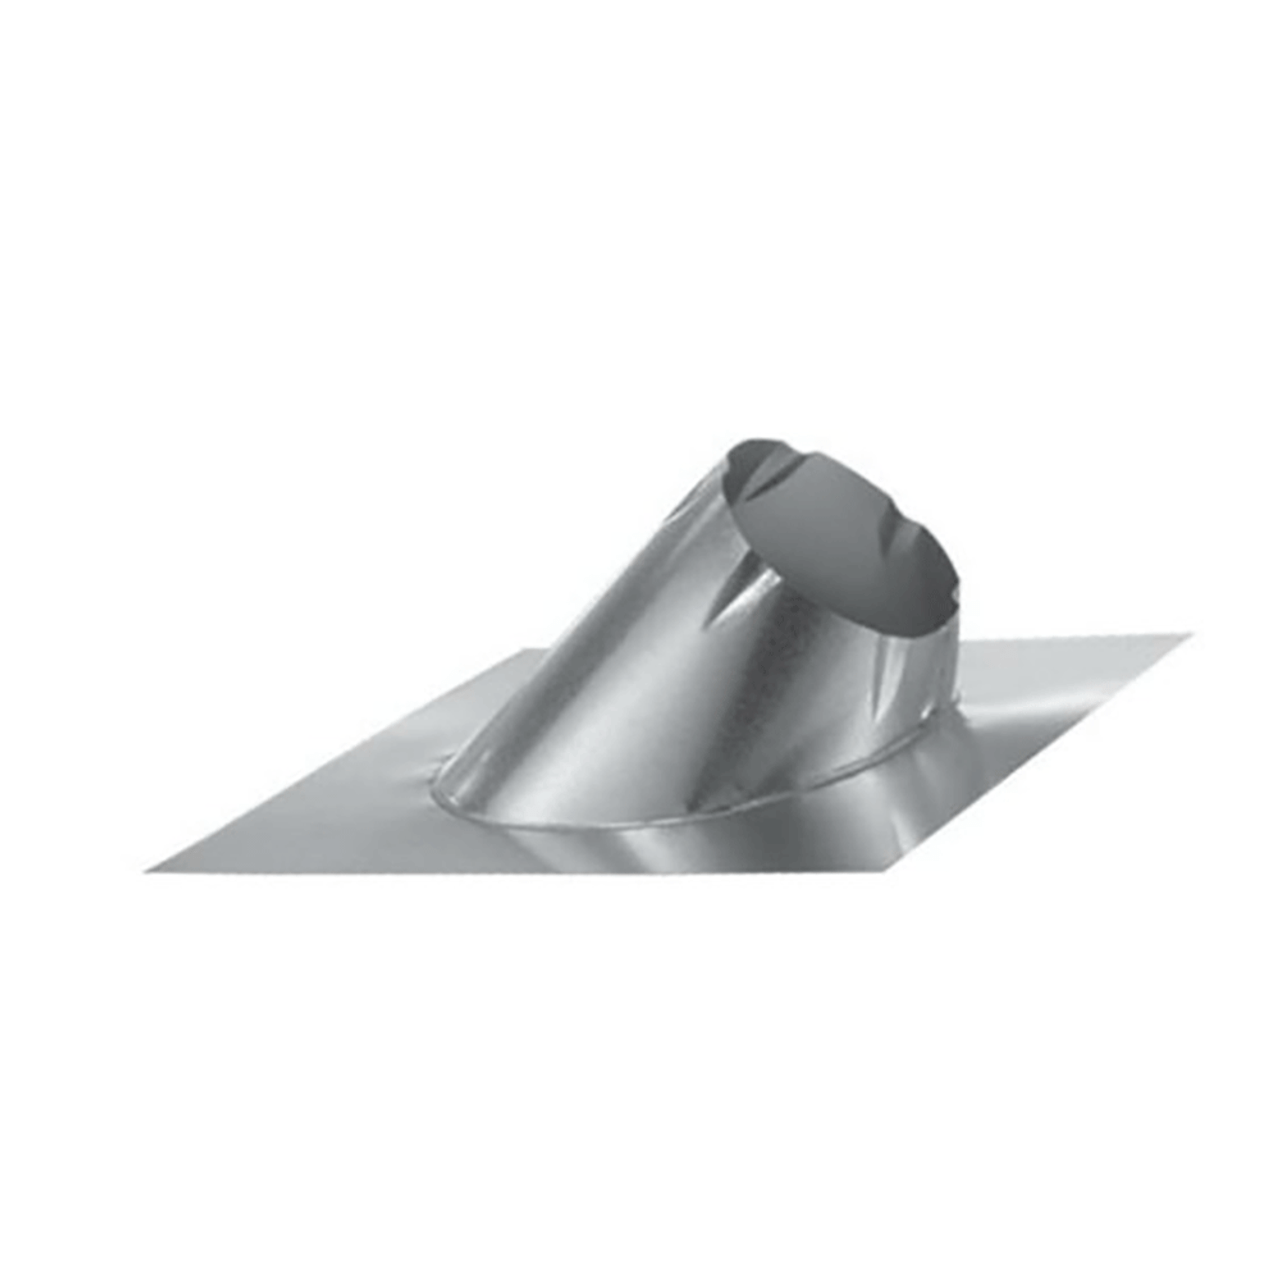 DuraVent DuraTech Chimney Aluminum Roof Flashing